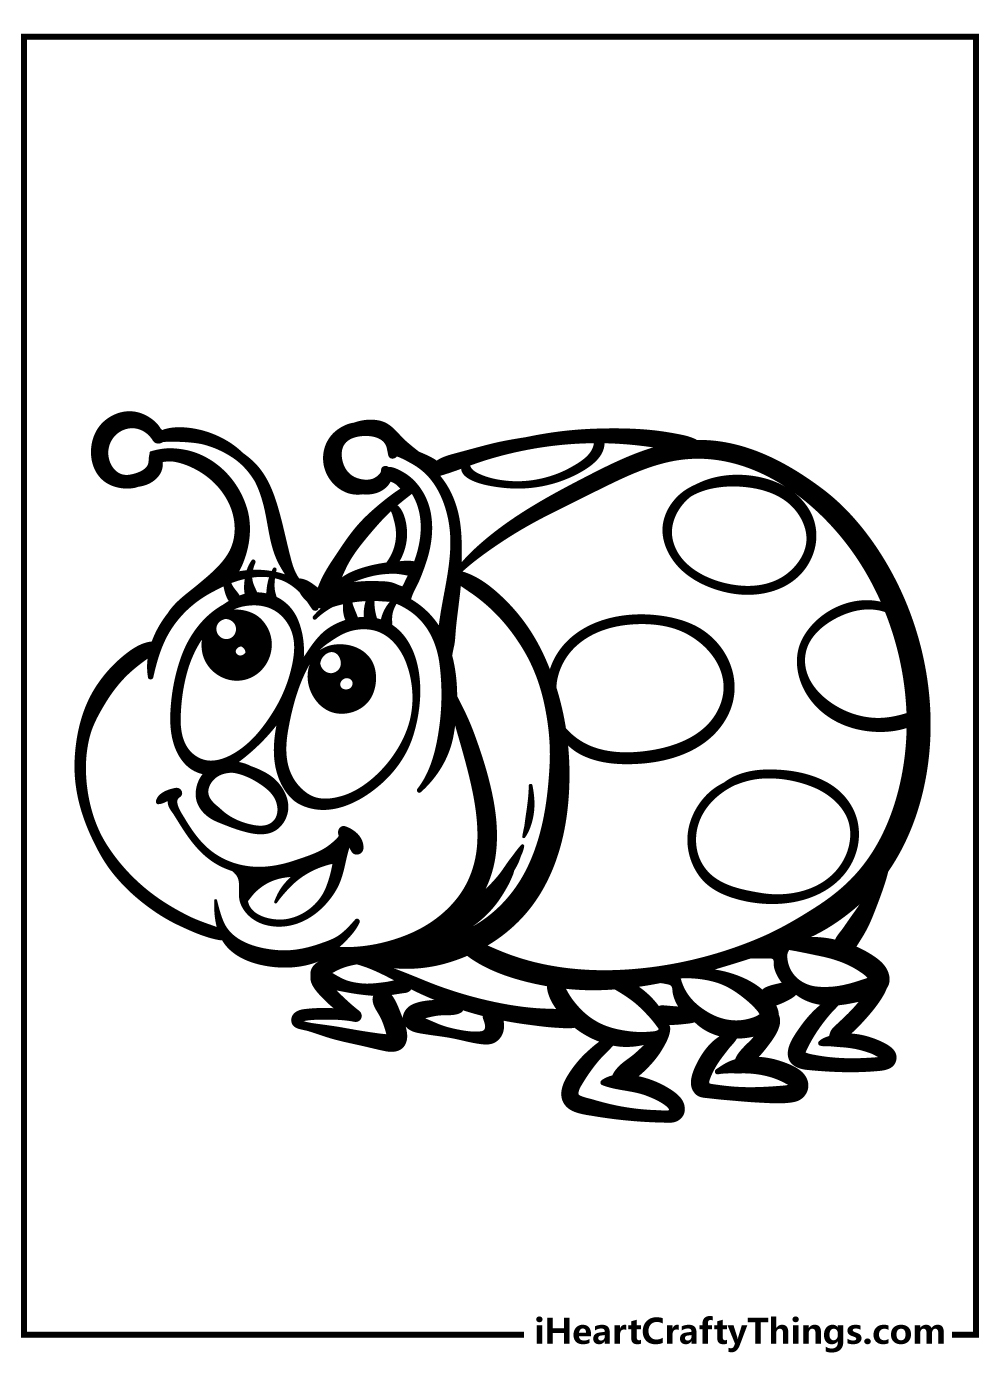 Printable Ladybug Coloring Pages Updated 20